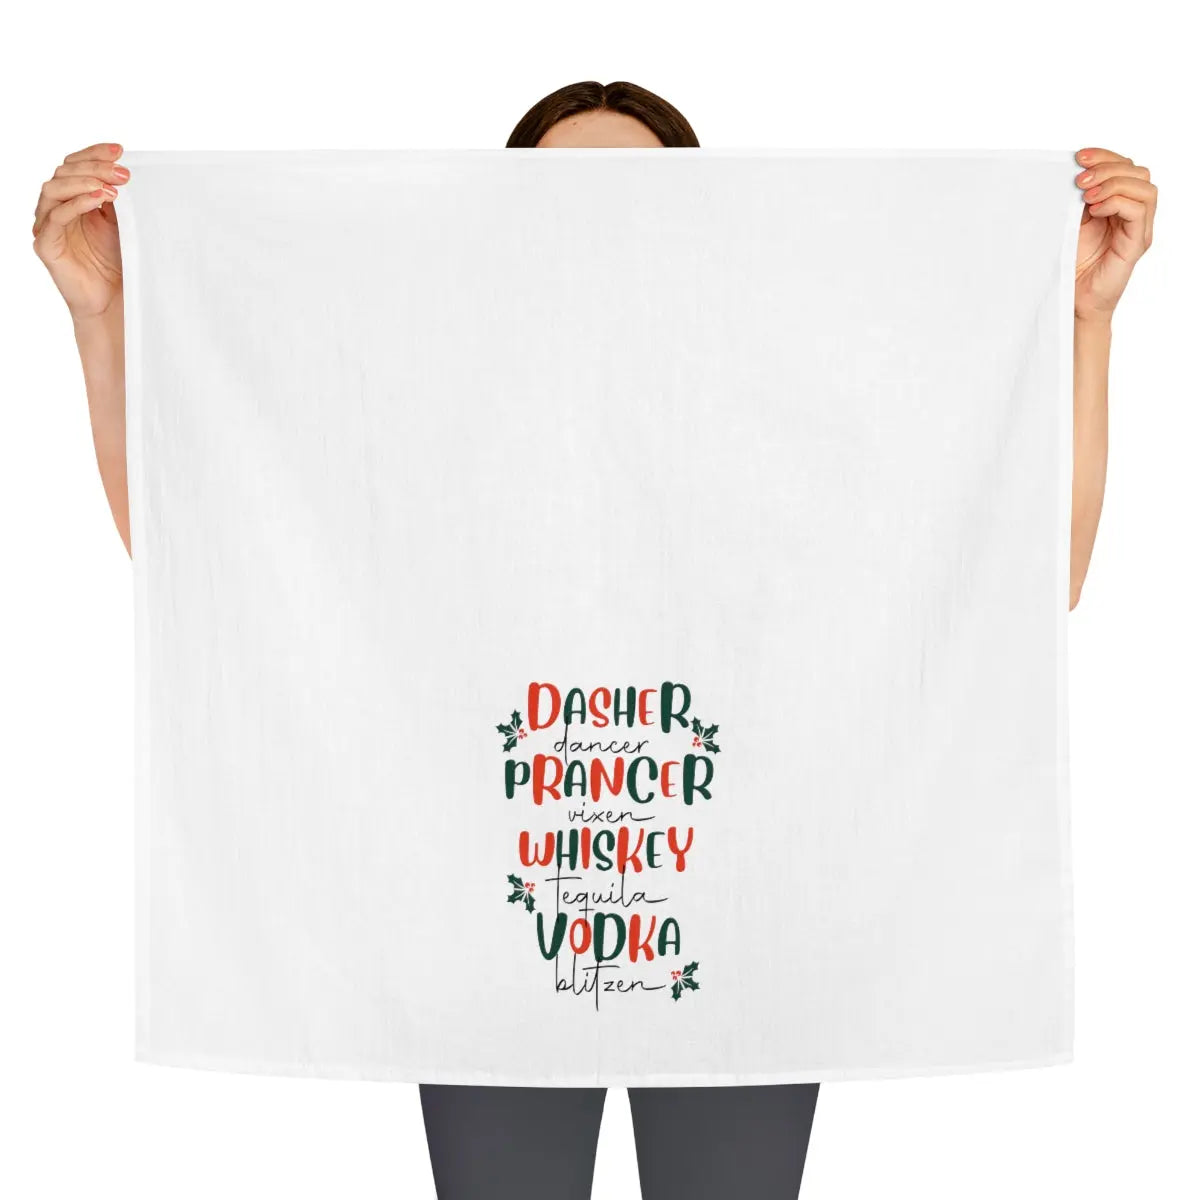 Funny Dish Towel, Cute Kitchen Towels, Funny Kitchen Towel, Hostess Gift